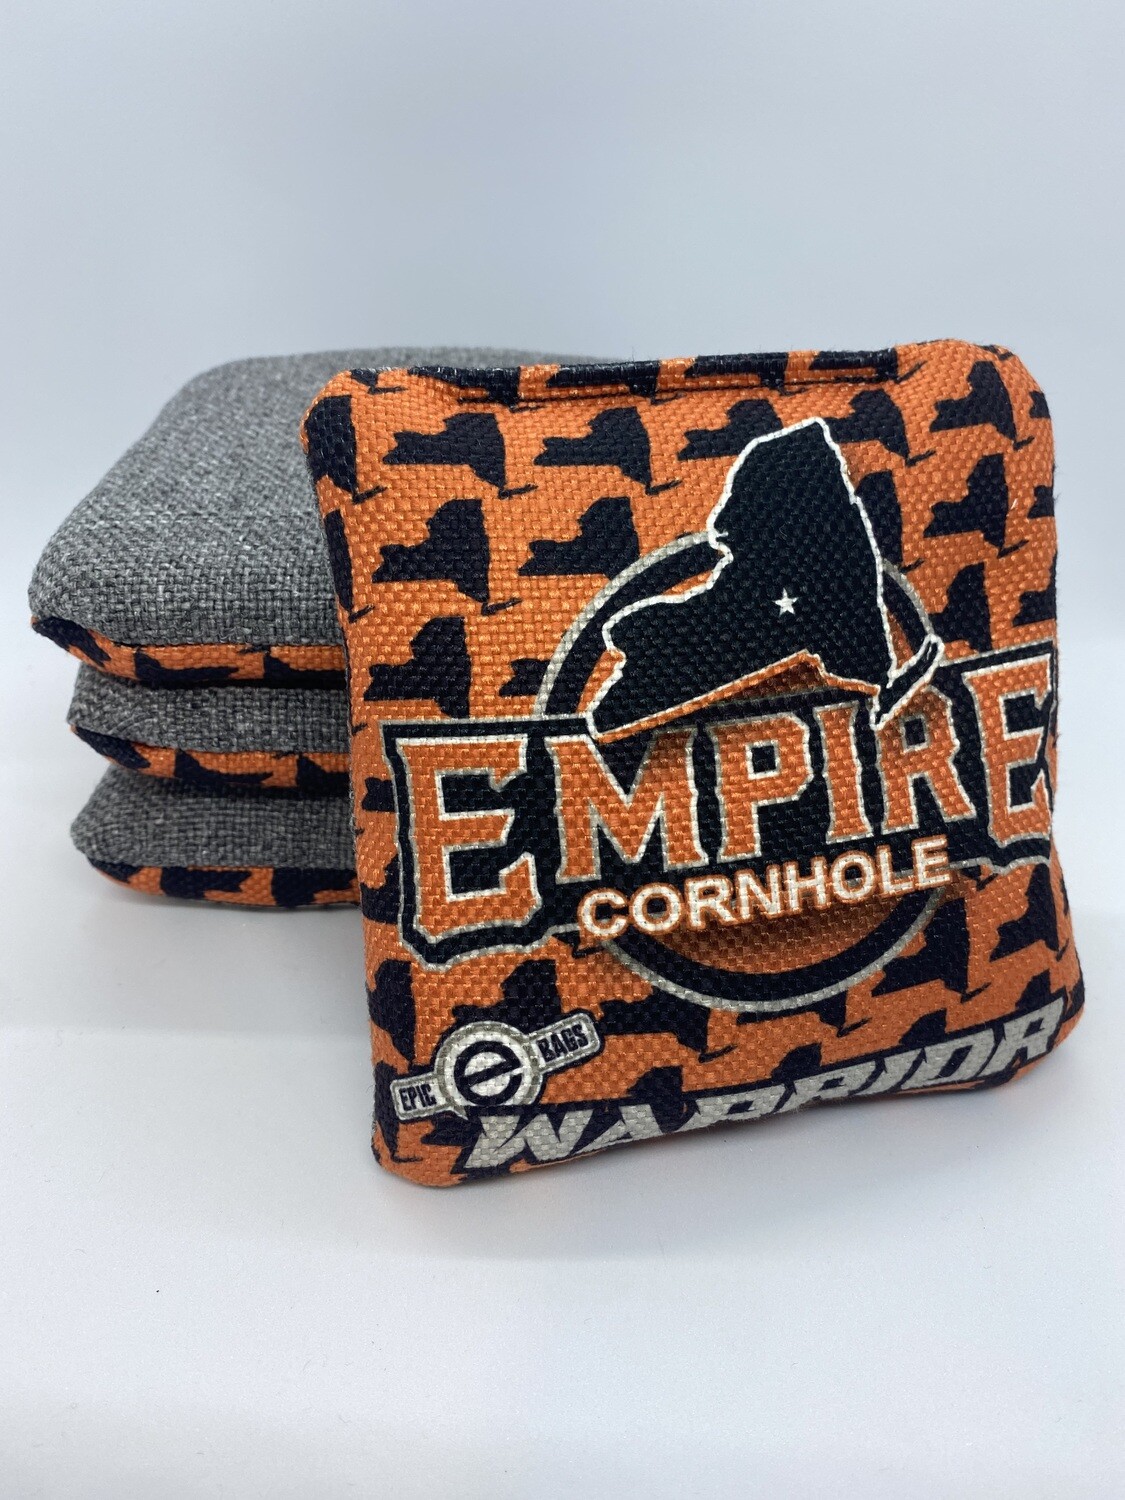 Empire Branded Bags